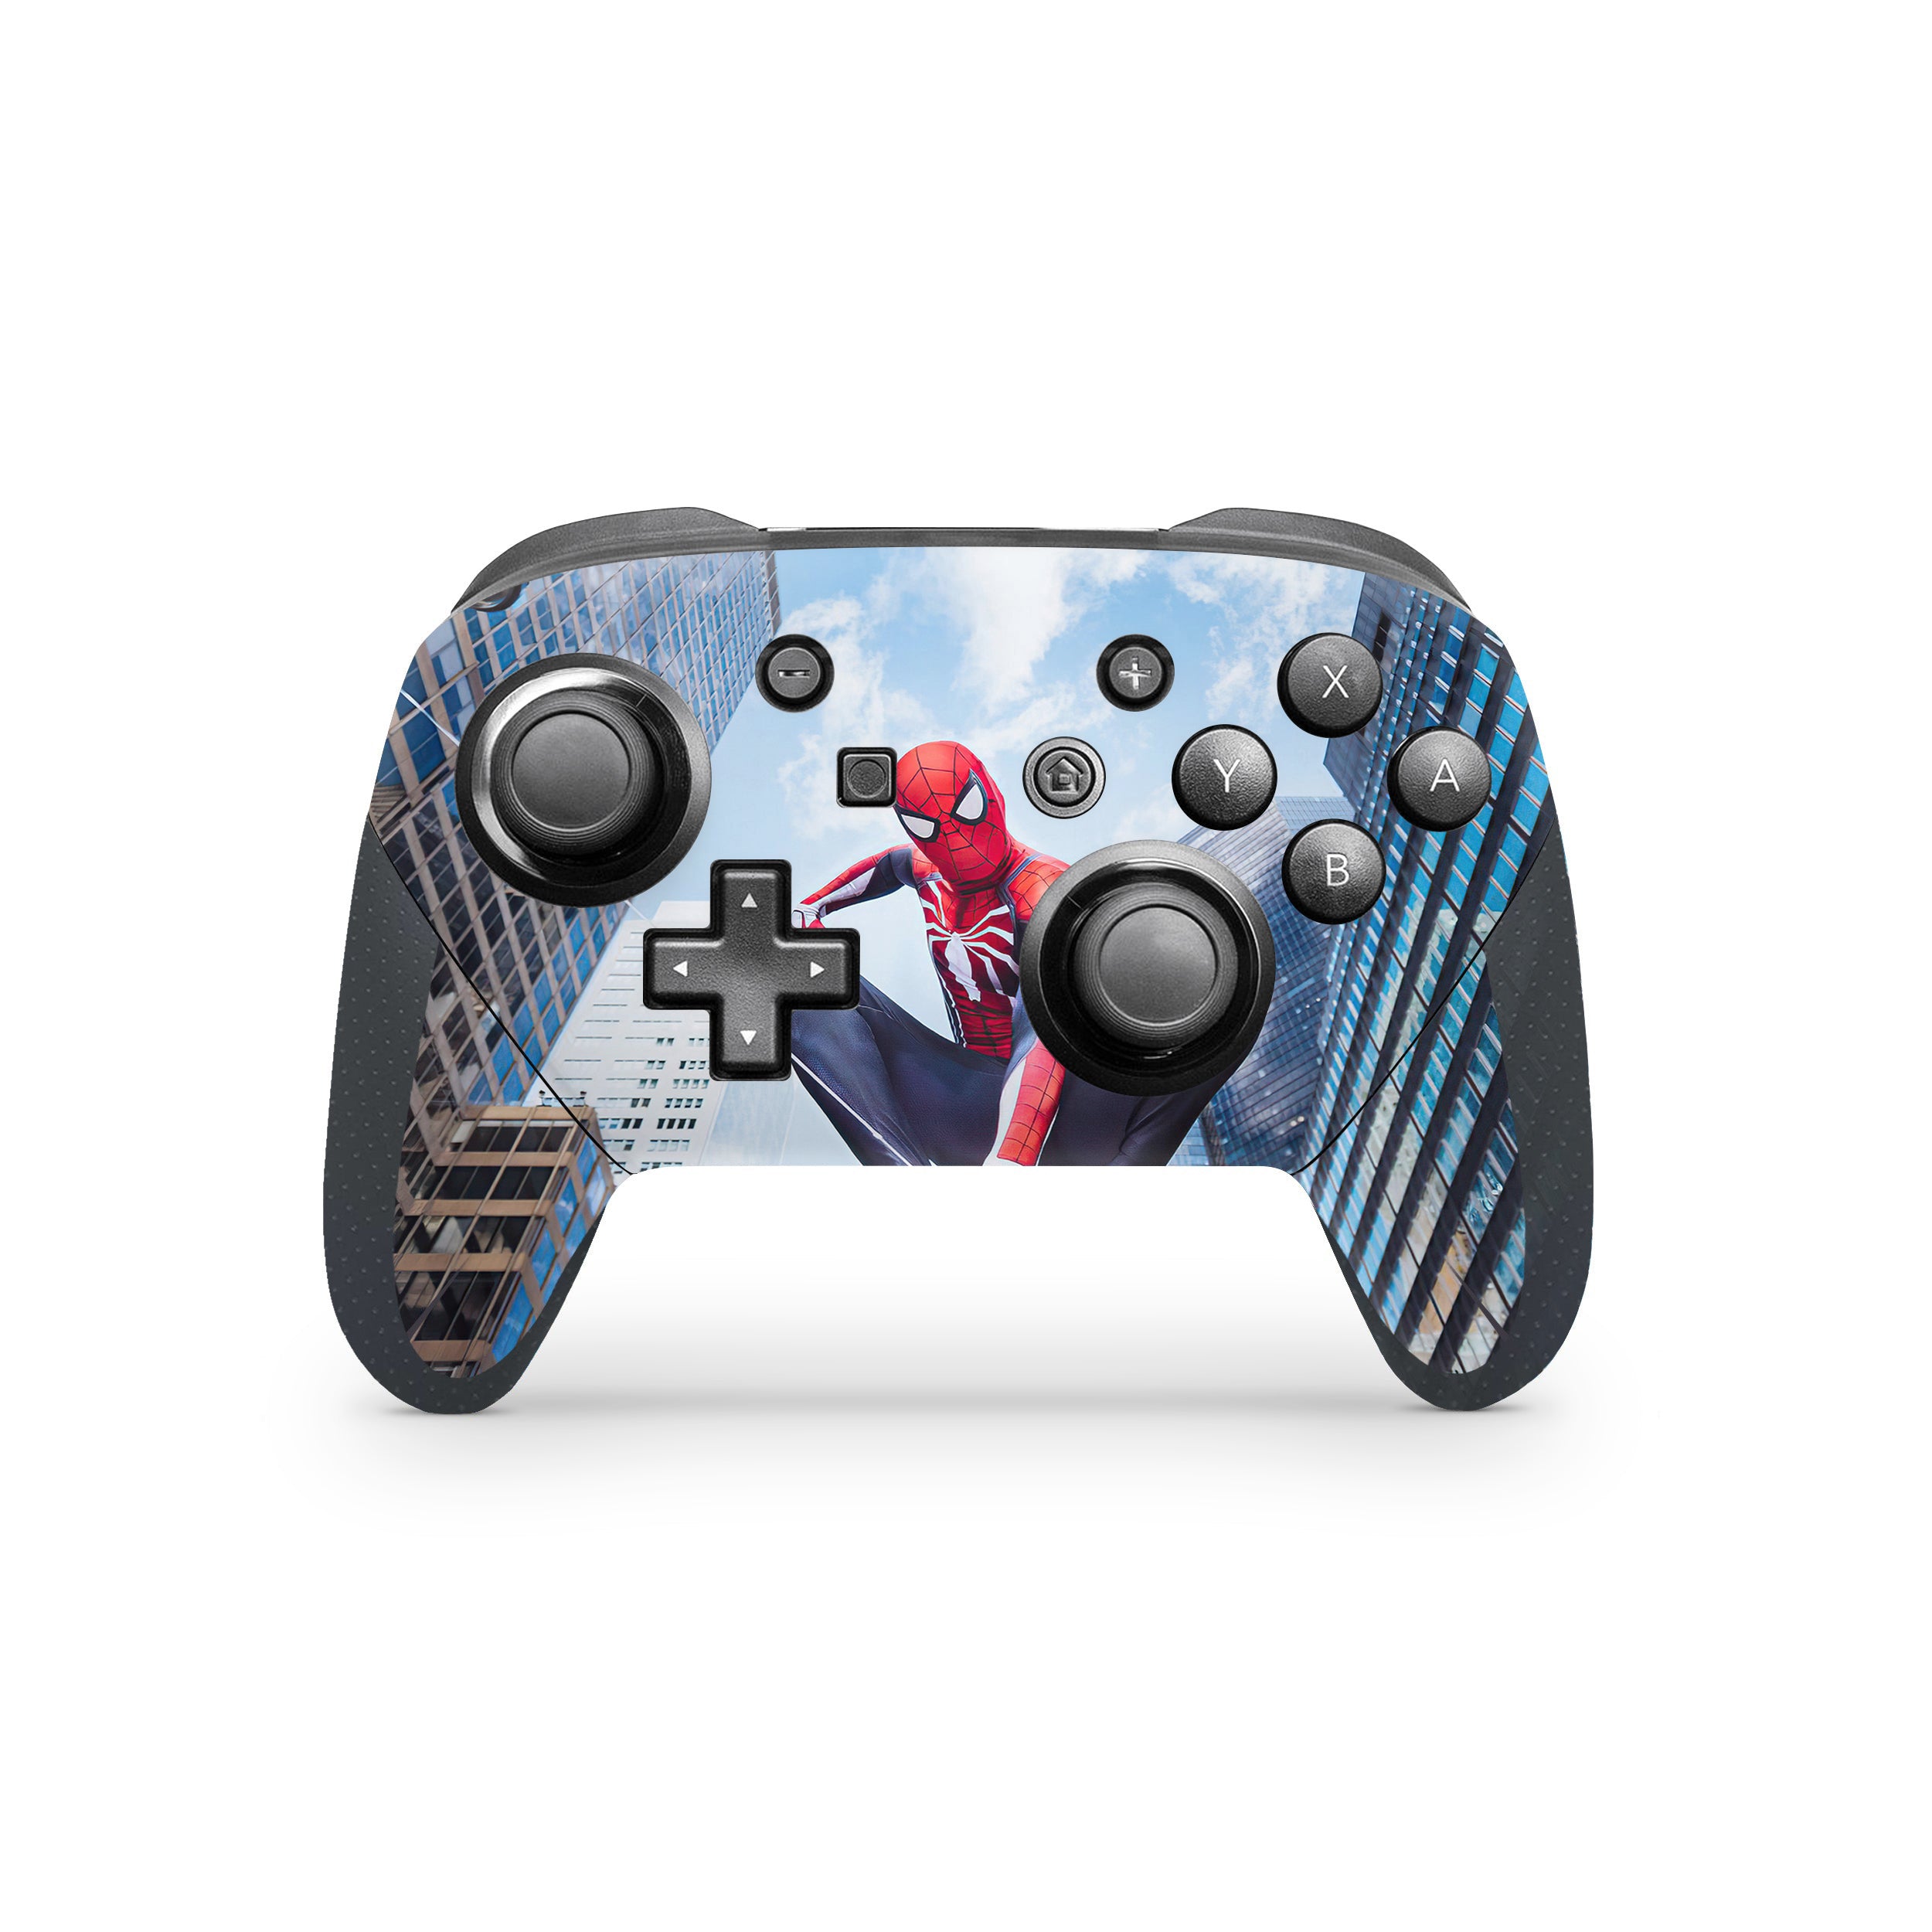 A video game skin featuring a Marvel Comics Spider Man design for the Switch Pro Controller.